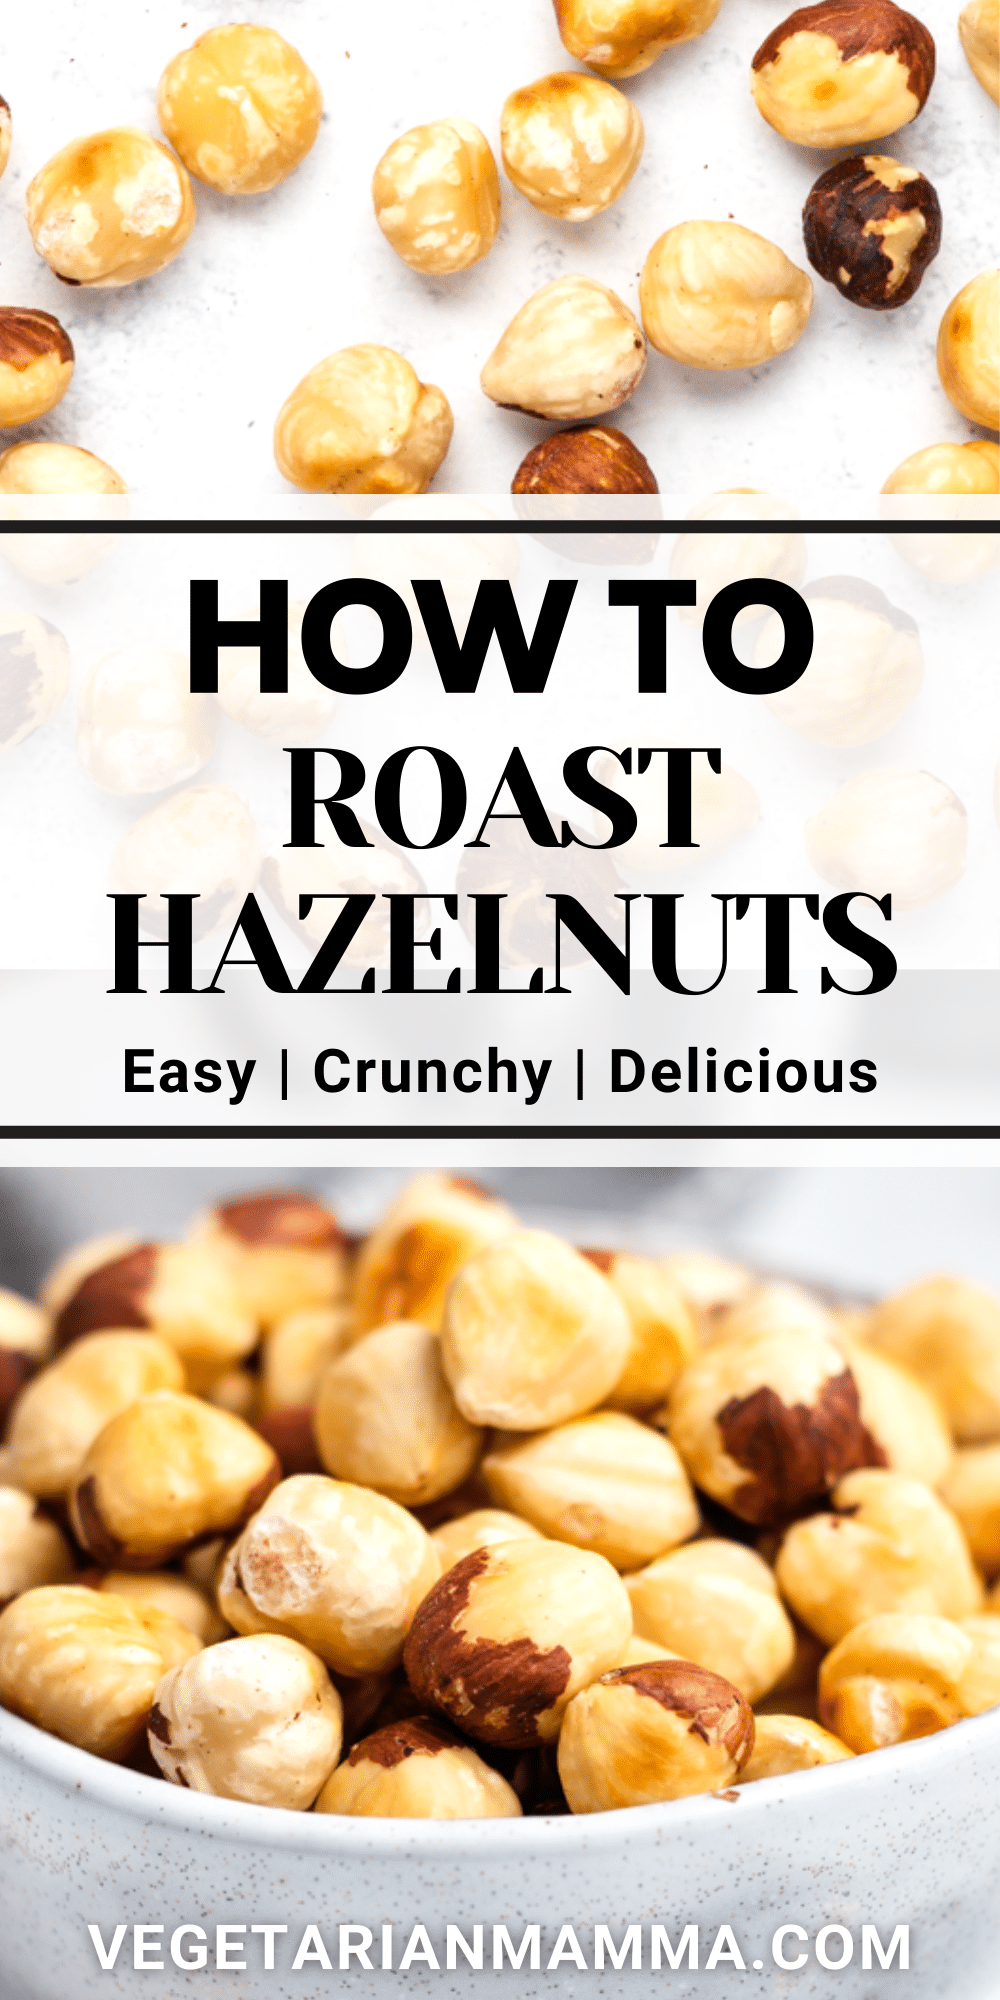 Learn how to roast hazelnuts in just minutes. We offer directions for your oven or a skillet! Read on to learn how to roast hazelnuts! | how to roast hazelnuts | how to roast hazelnuts in the oven | Oven roasted hazelnuts | skillet roasted hazelnuts